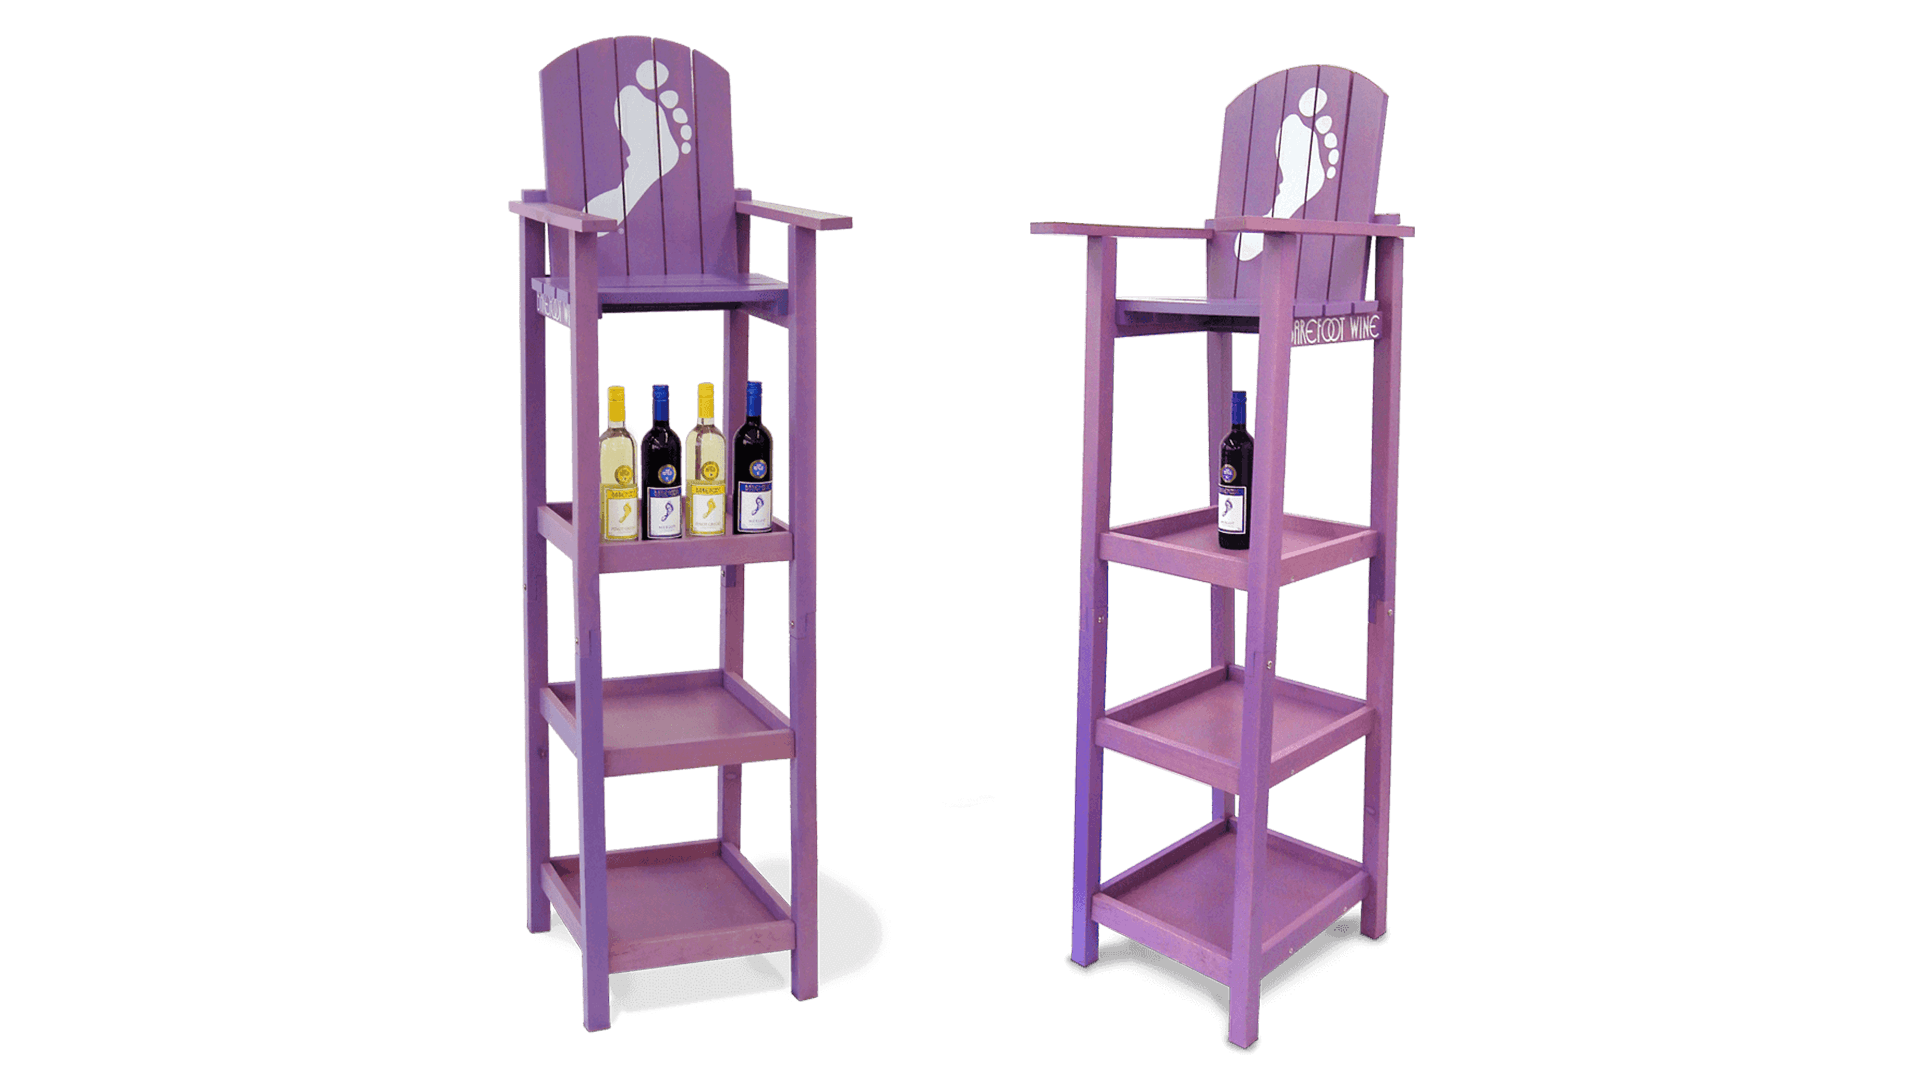 Barefoot Wine Rescue Chair Lifeguard chair